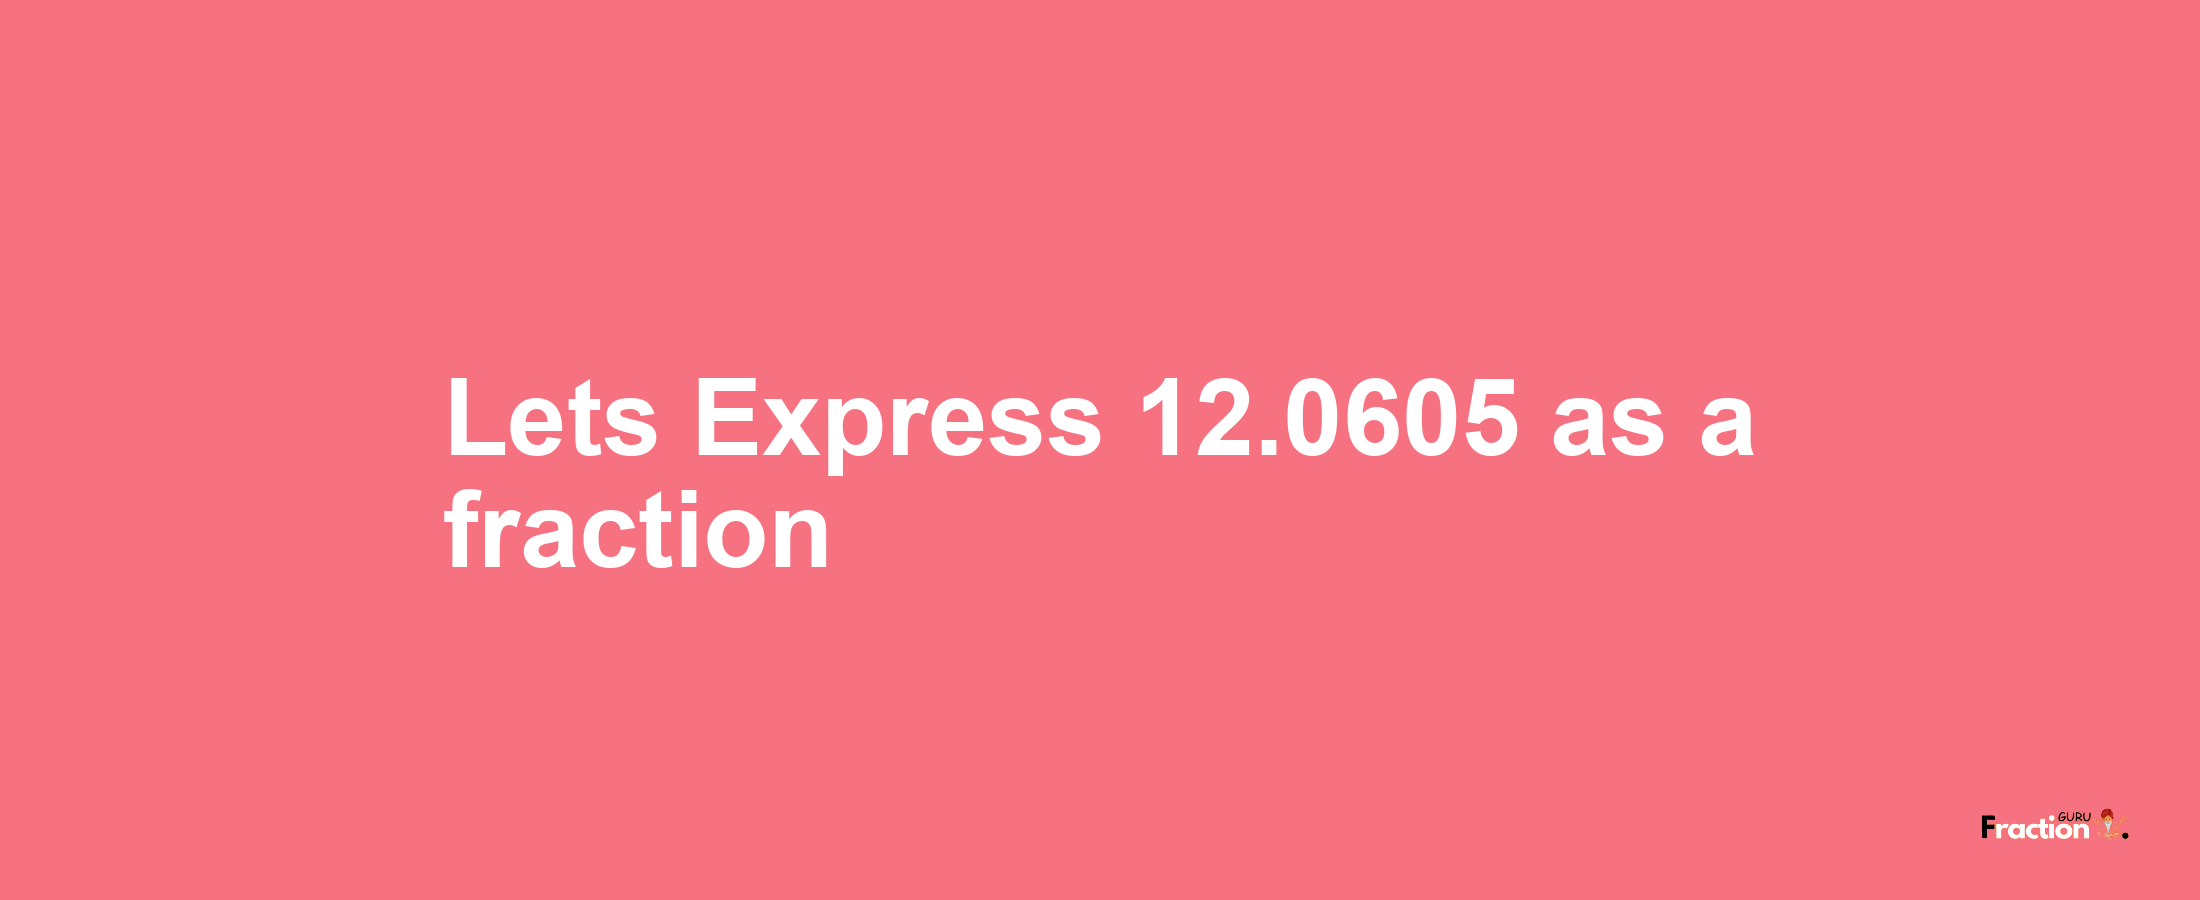 Lets Express 12.0605 as afraction